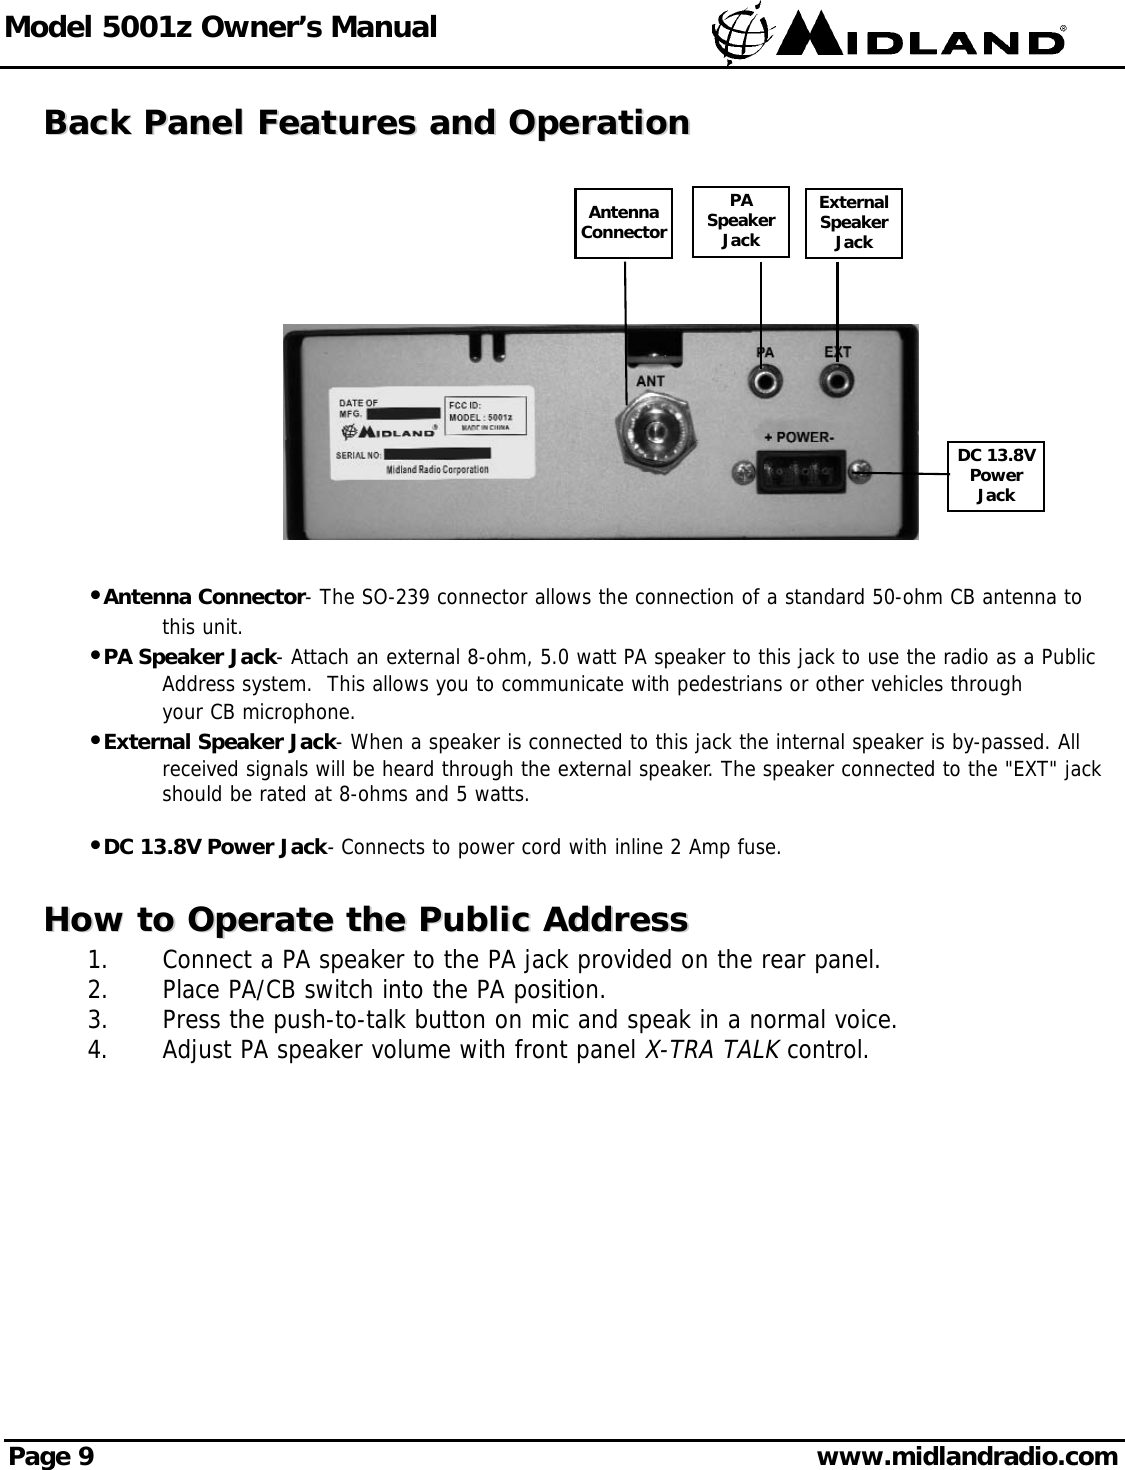 Model 5001z Owner’s ManualPage 9 www.midlandradio.comBack Panel Features and OperationBack Panel Features and OperationPASpeakerJackExternalSpeakerJackDC 13.8VPowerJackAntennaConnector•Antenna Connector- The SO-239 connector allows the connection of a standard 50-ohm CB antenna to this unit.•PA Speaker Jack- Attach an external 8-ohm, 5.0 watt PA speaker to this jack to use the radio as a Public Address system.  This allows you to communicate with pedestrians or other vehicles through your CB microphone.•External Speaker Jack- When a speaker is connected to this jack the internal speaker is by-passed. All received signals will be heard through the external speaker. The speaker connected to the &quot;EXT&quot; jack should be rated at 8-ohms and 5 watts.•DC 13.8V Power Jack- Connects to power cord with inline 2 Amp fuse.How to Operate the Public AddressHow to Operate the Public Address1.  Connect a PA speaker to the PA jack provided on the rear panel.2.  Place PA/CB switch into the PA position.3.  Press the push-to-talk button on mic and speak in a normal voice.4.  Adjust PA speaker volume with front panel X-TRA TALKcontrol.